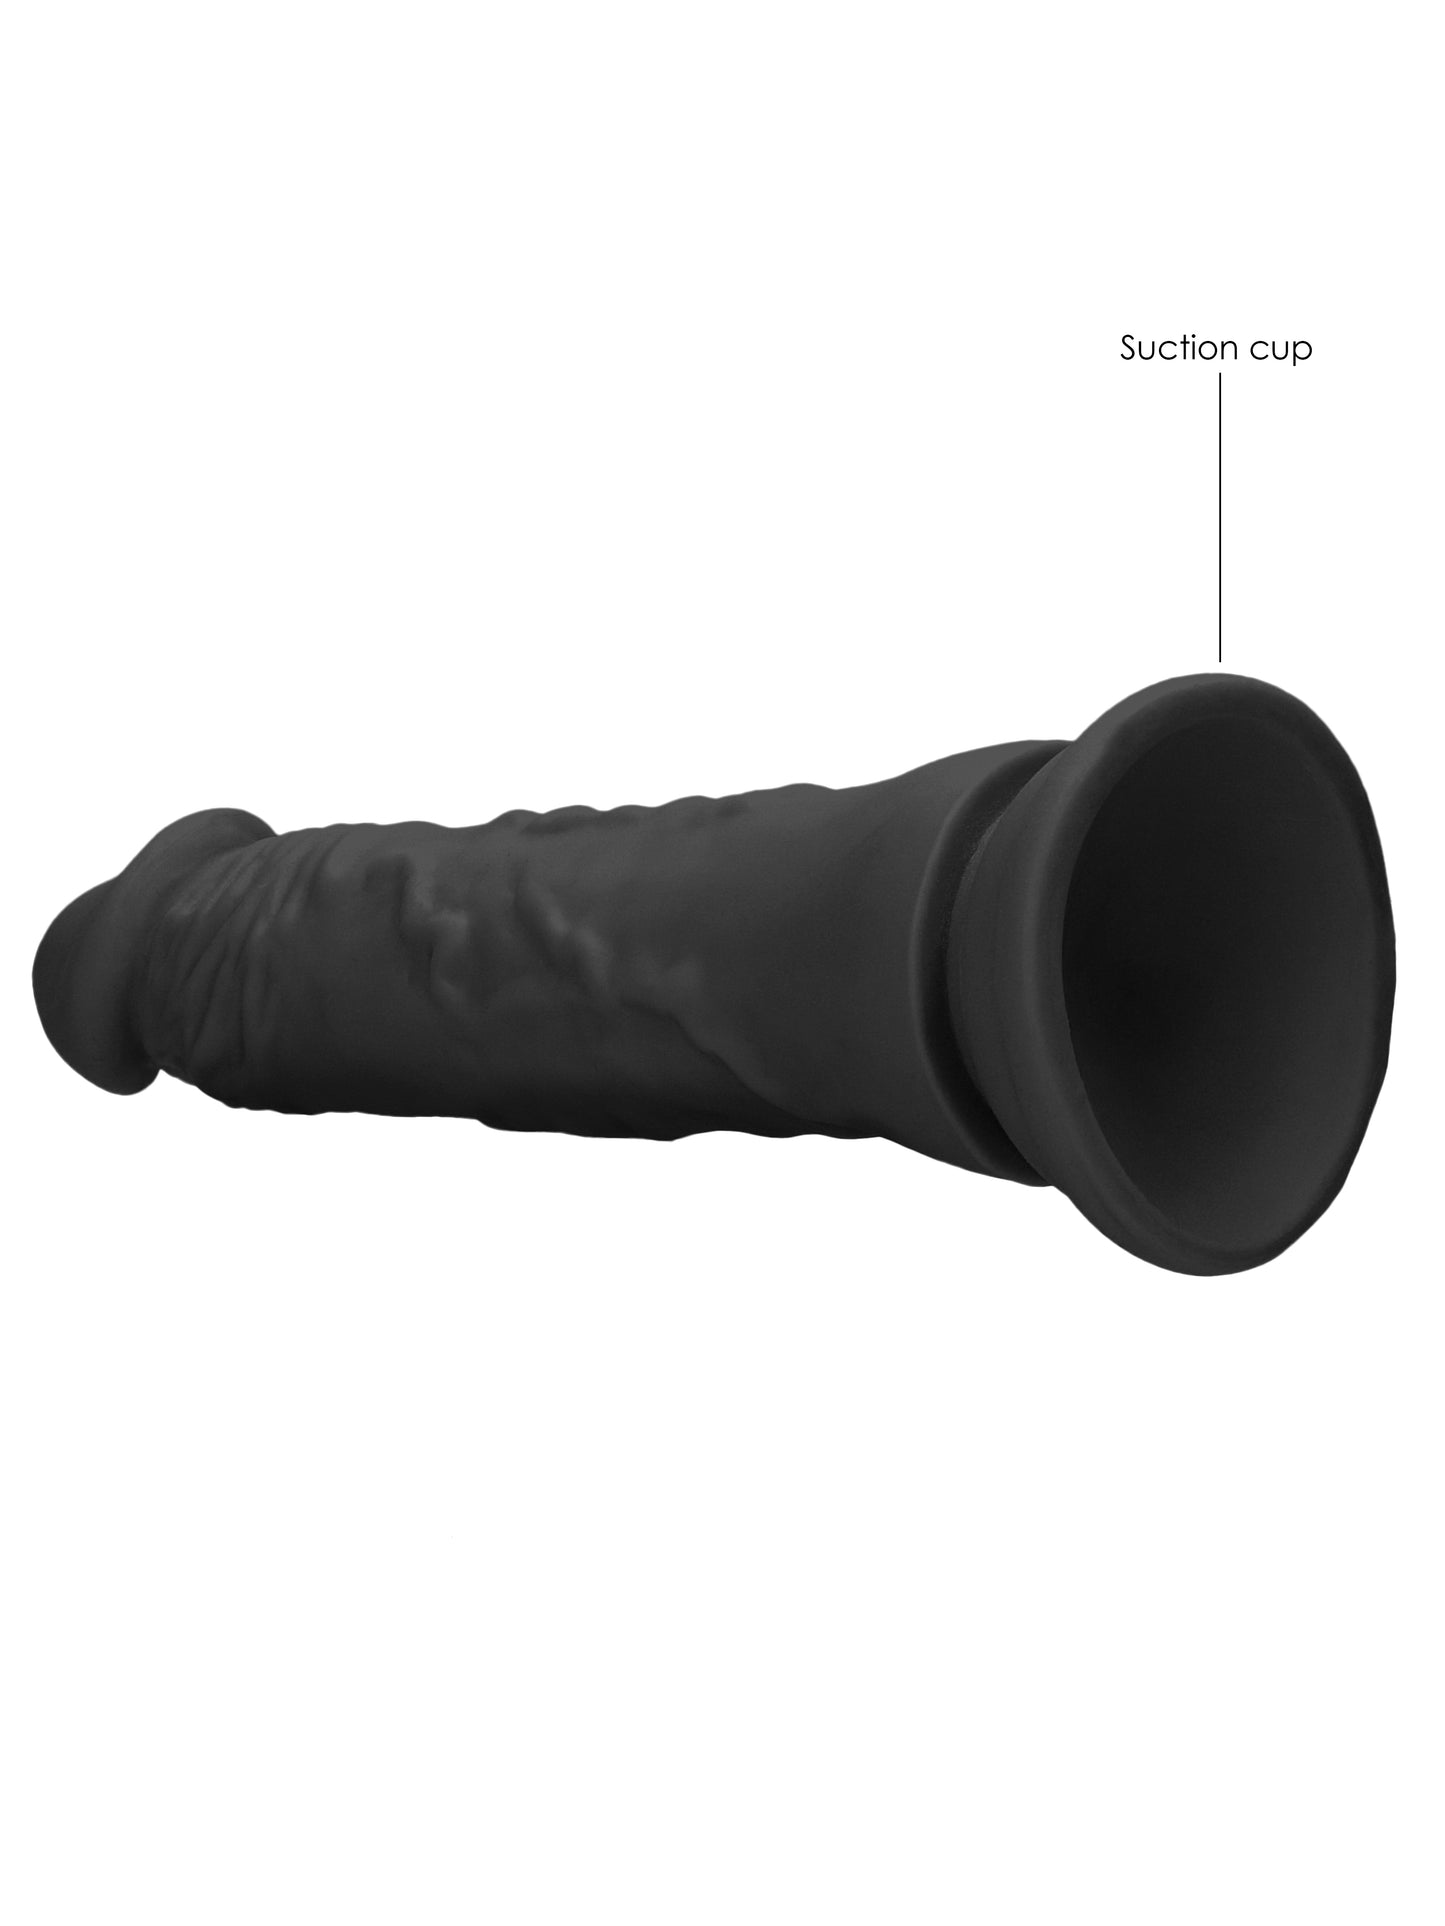 RealRock - Realistic Dong without Balls with Suction Cup Black 8" / 20 cm